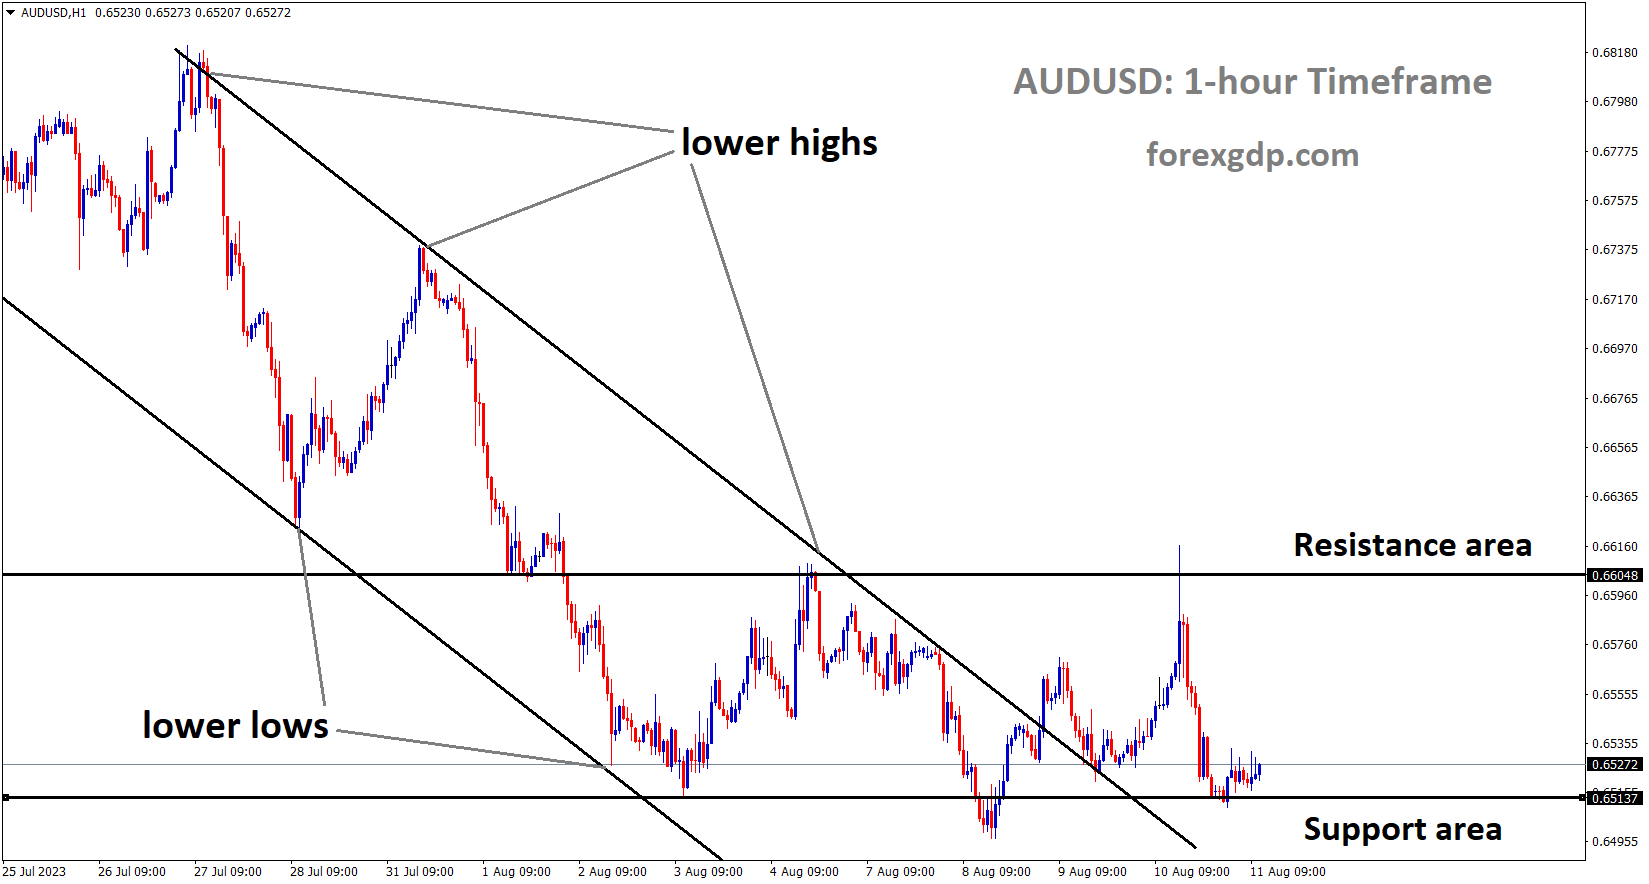 AUDUSD is moving in the Descending channel and the market has reached the support area of the minor Box pattern.